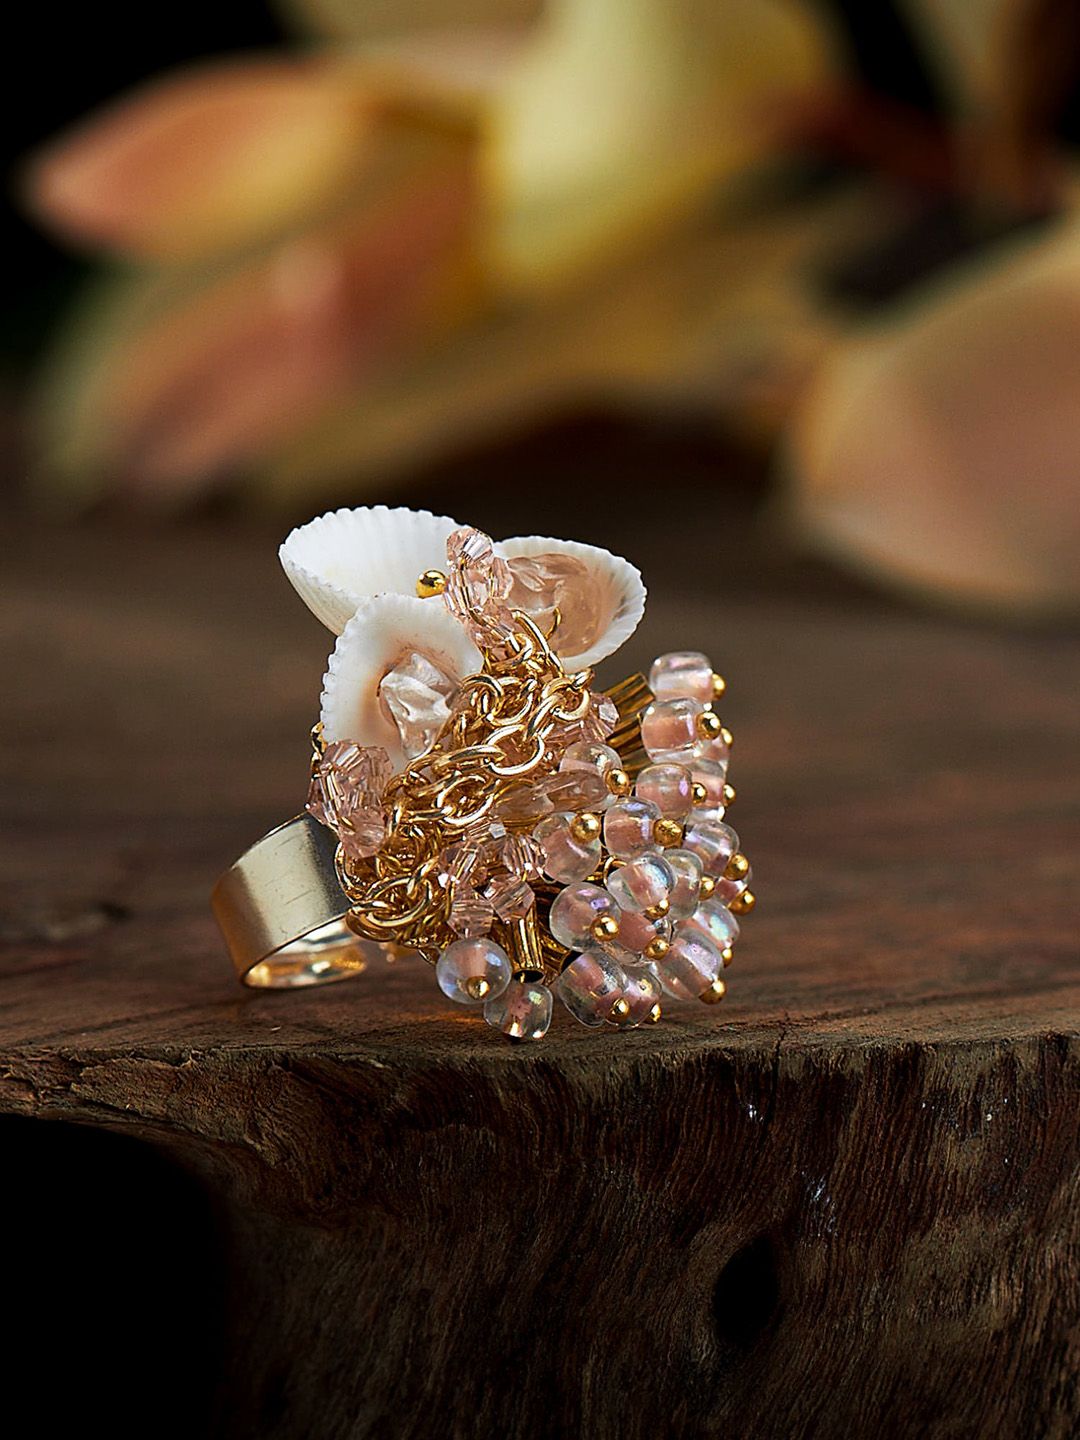 D'oro Gold-Plated Peach Adjustable Finger Ring With Pearls & Metallic Beads Price in India